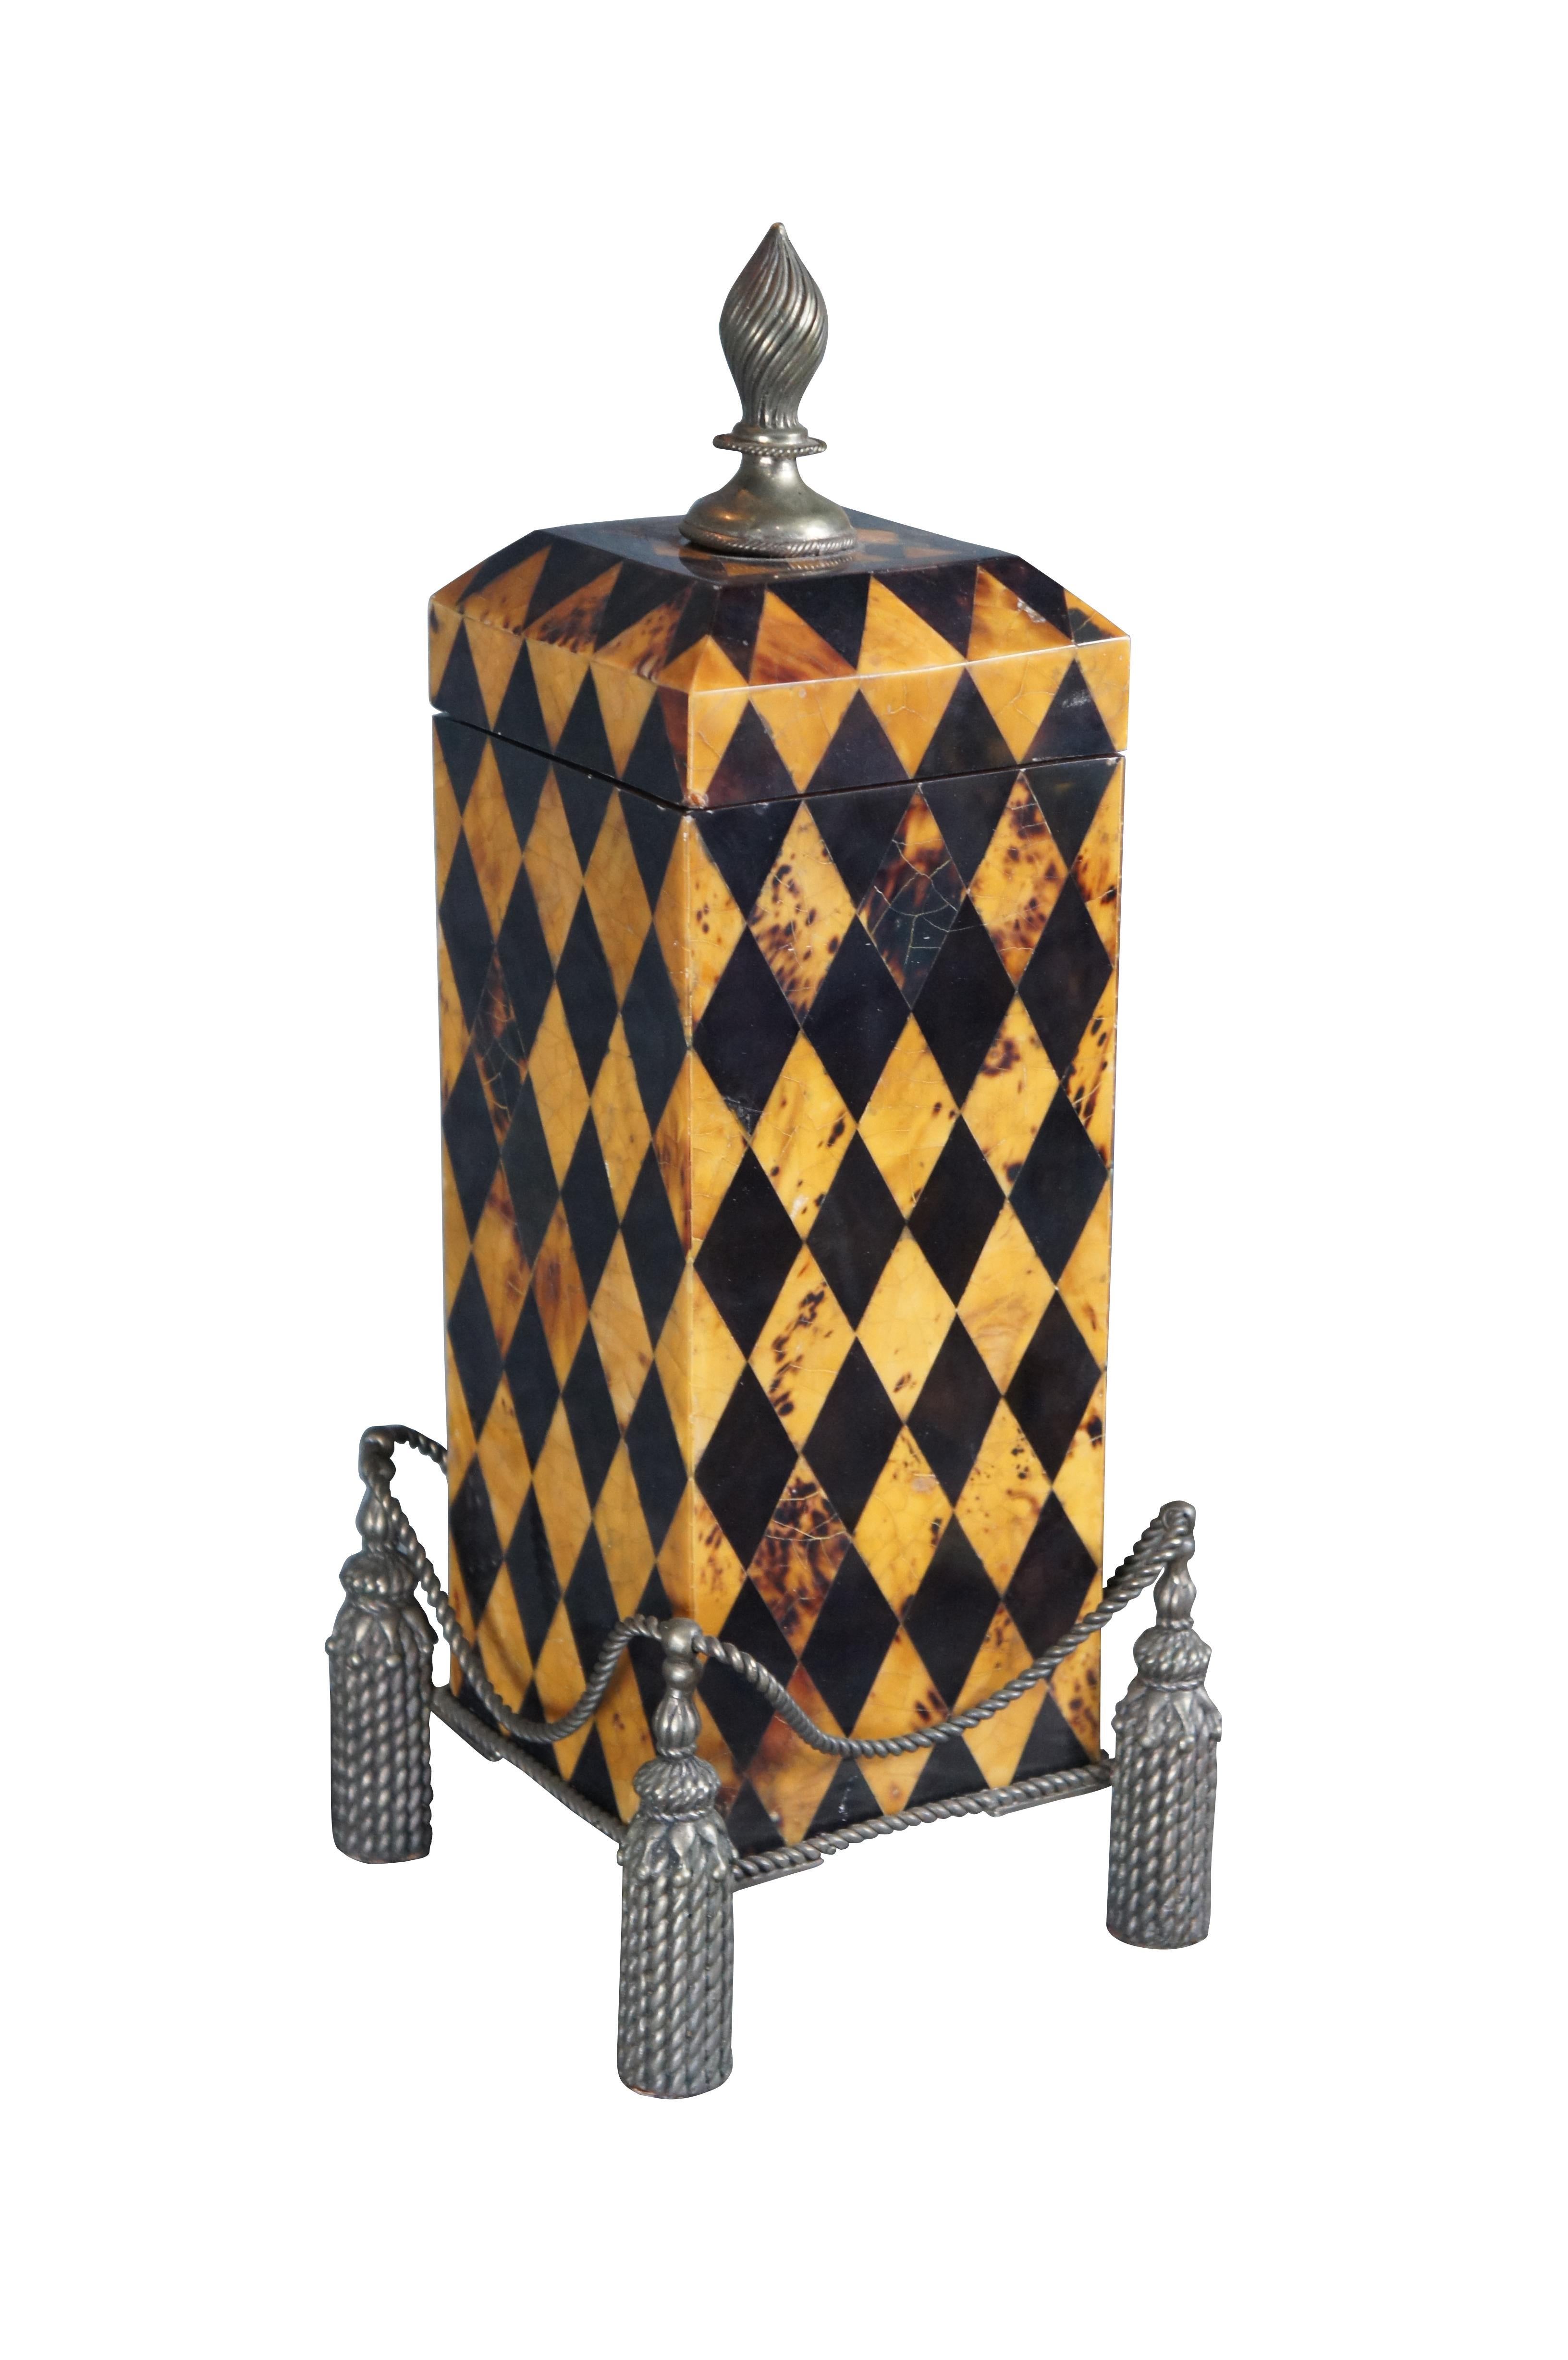 Late 20th Century Maitland Smith Lidded Box / Urn. Features a beautiful Harlequin pattern Penshell exterior resting on a footed brass neoclassical style tasseled base. The lid opens via a trophy shaped finial to a velvet lined